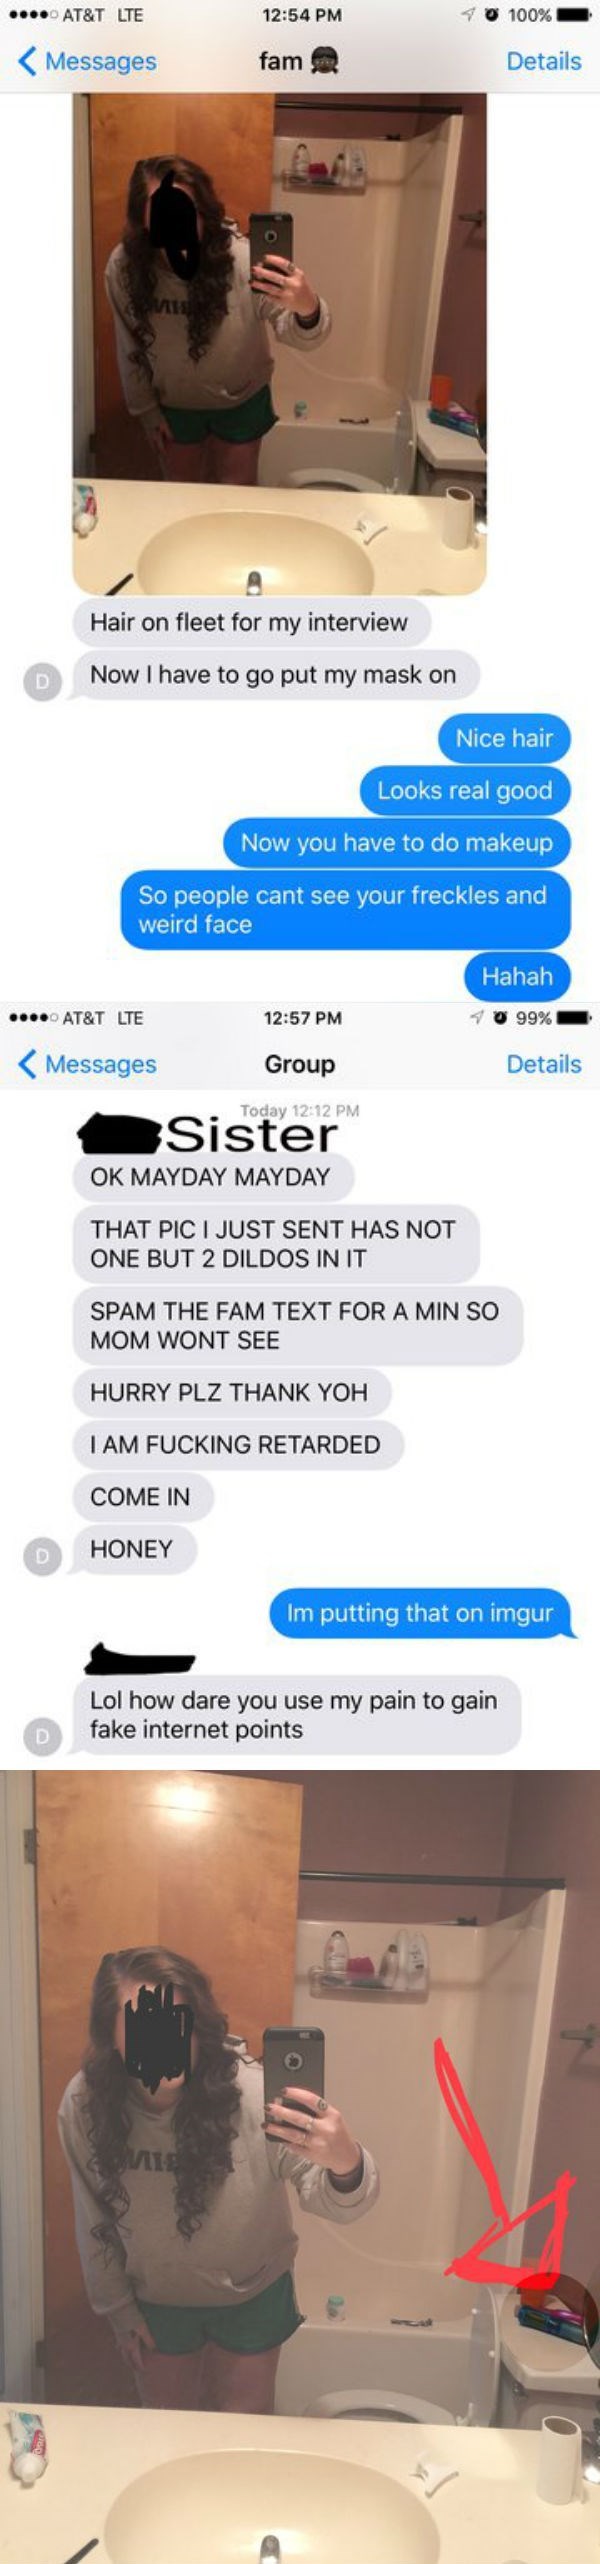 funny fail image girl sends selfie with dildos in background to family chat